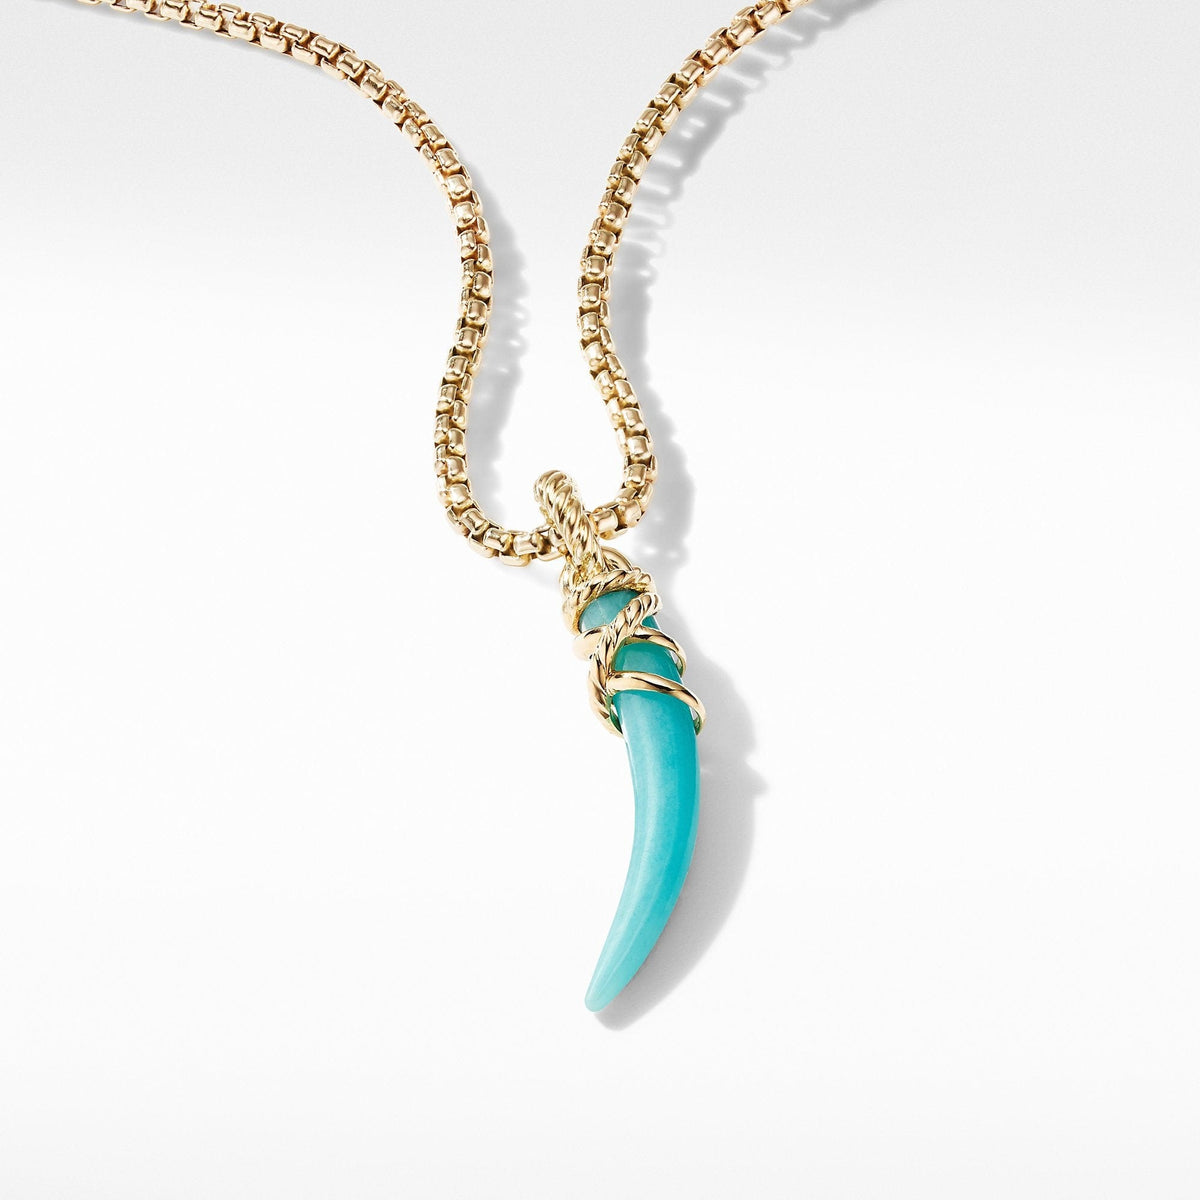 Tusk Amulet with Amazonite and 18K Yellow Gold